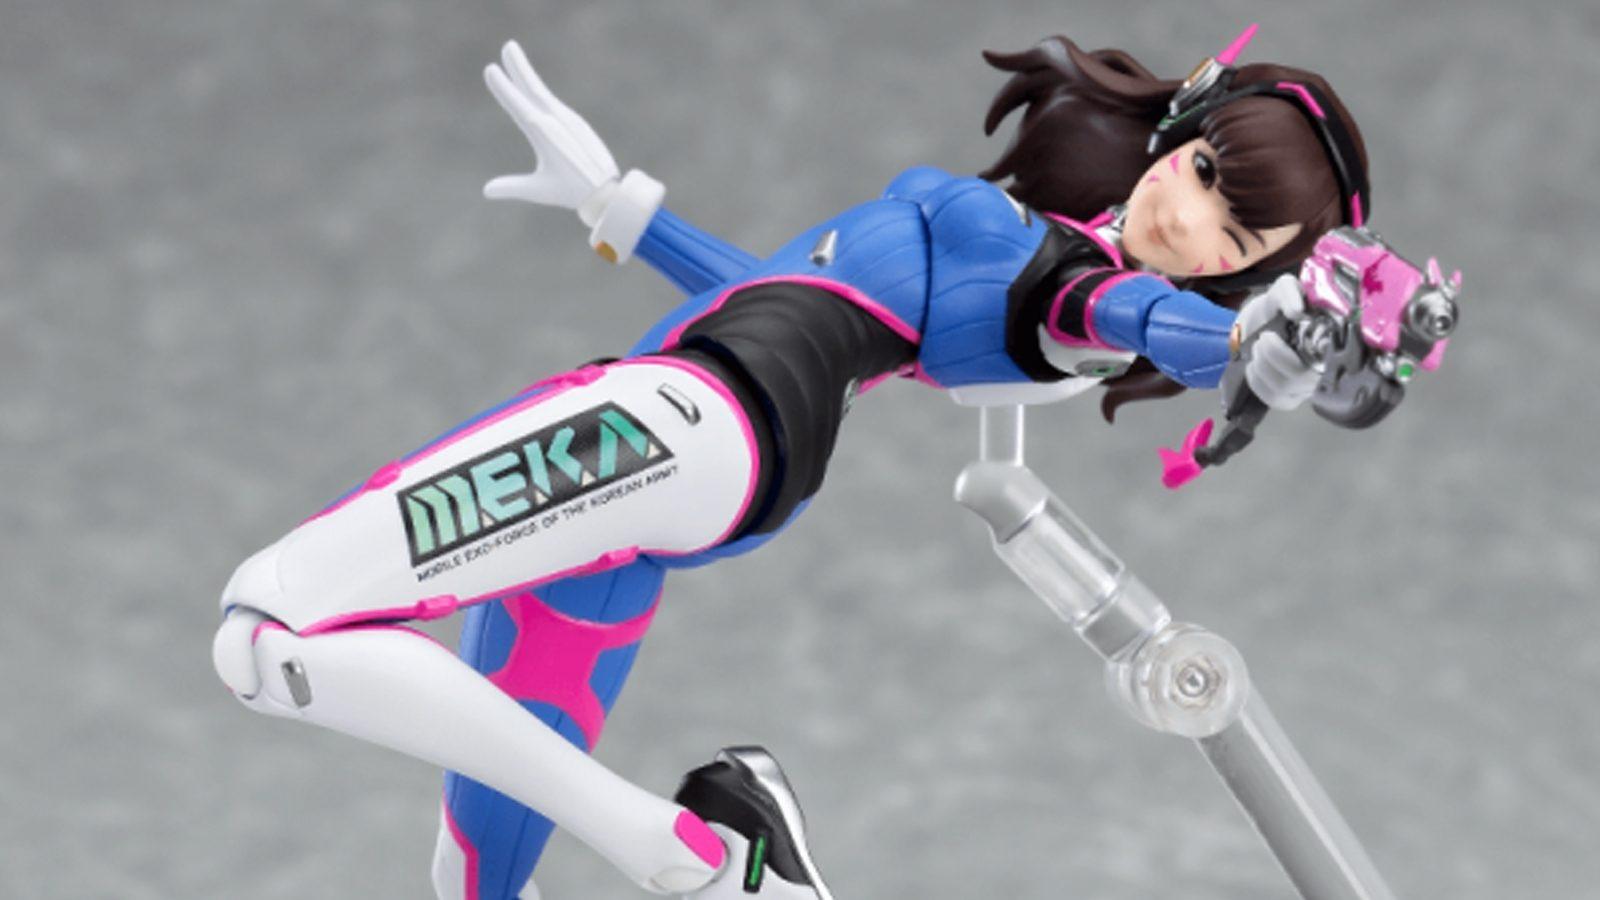 A Figma Action Figure of Overwatch Hero D.Va is Now Available for